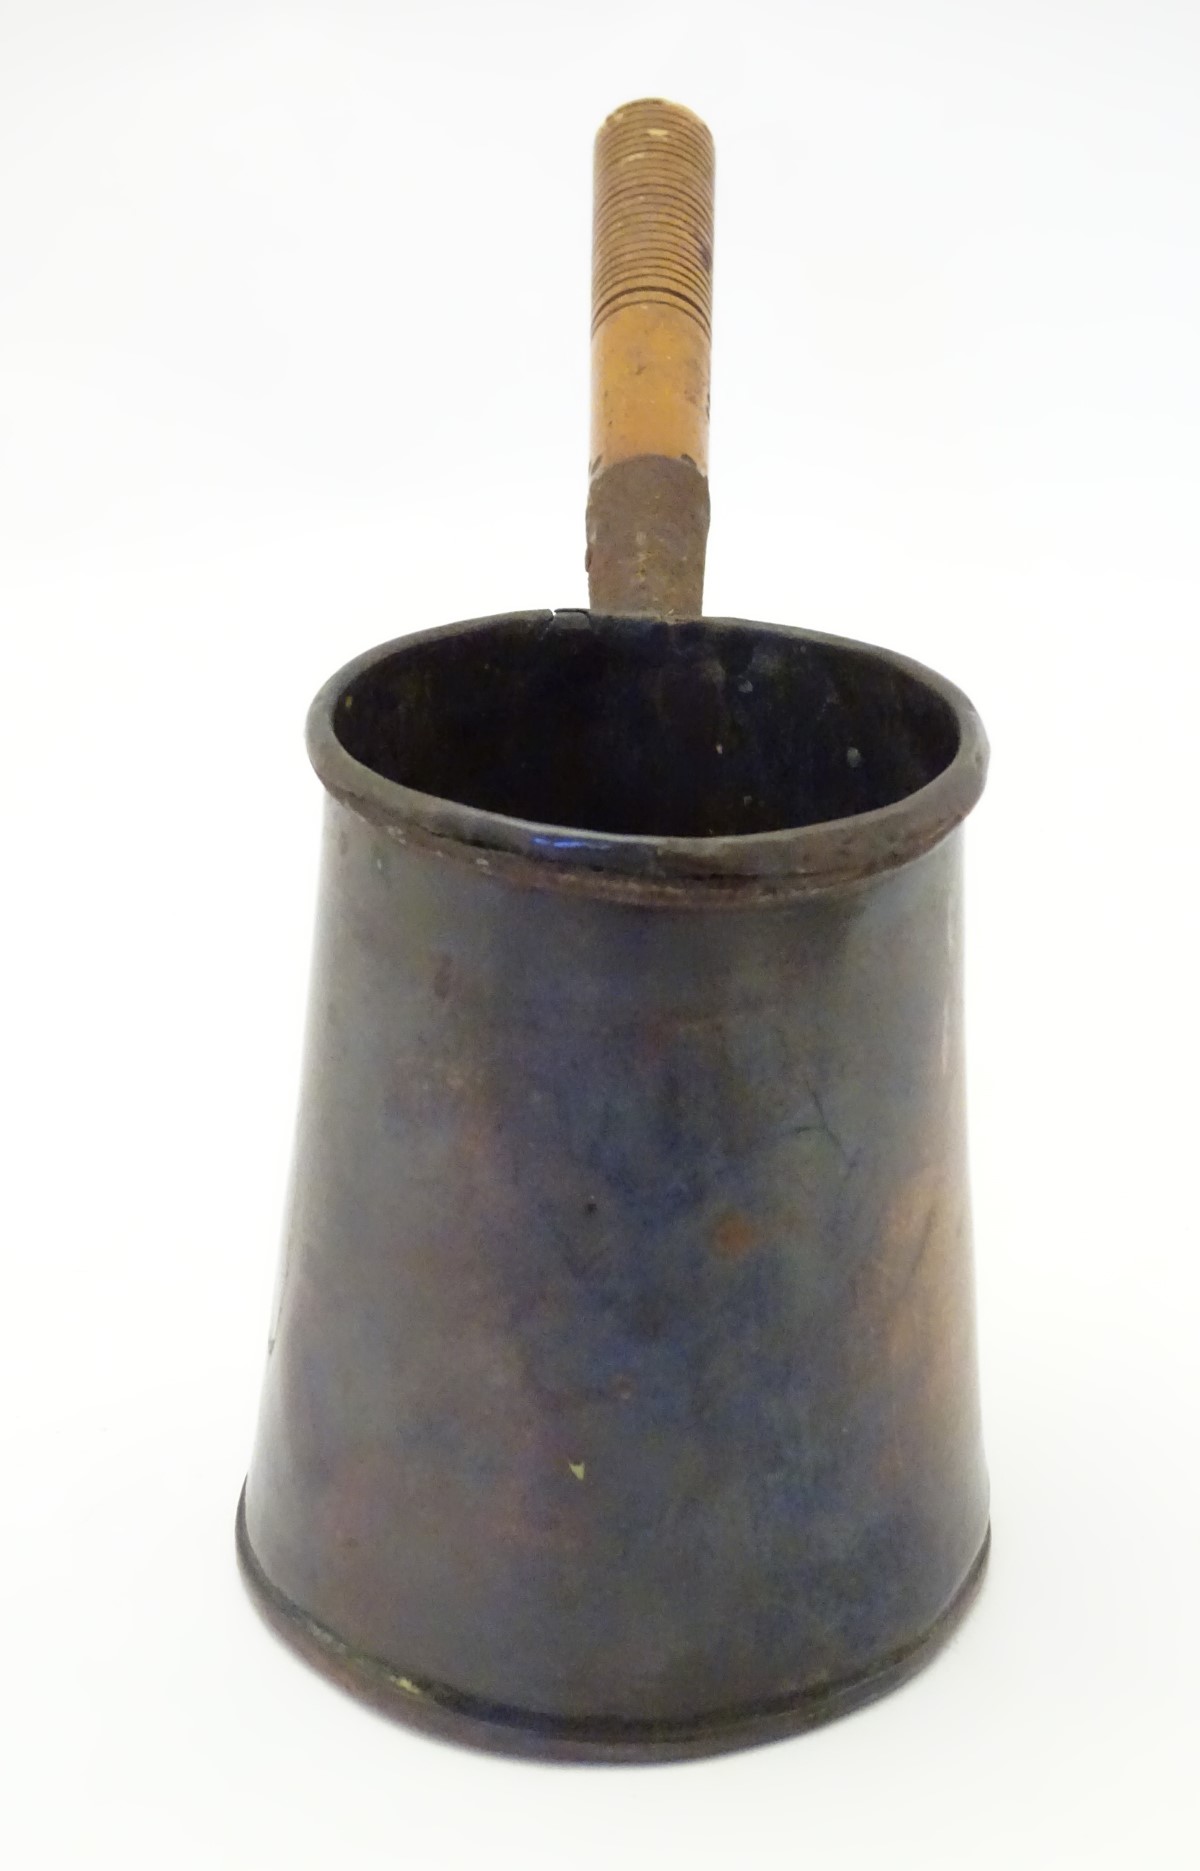 A c1900 stove-top coffee pot, of copper construction with a turned and carved beech handle. - Image 6 of 6